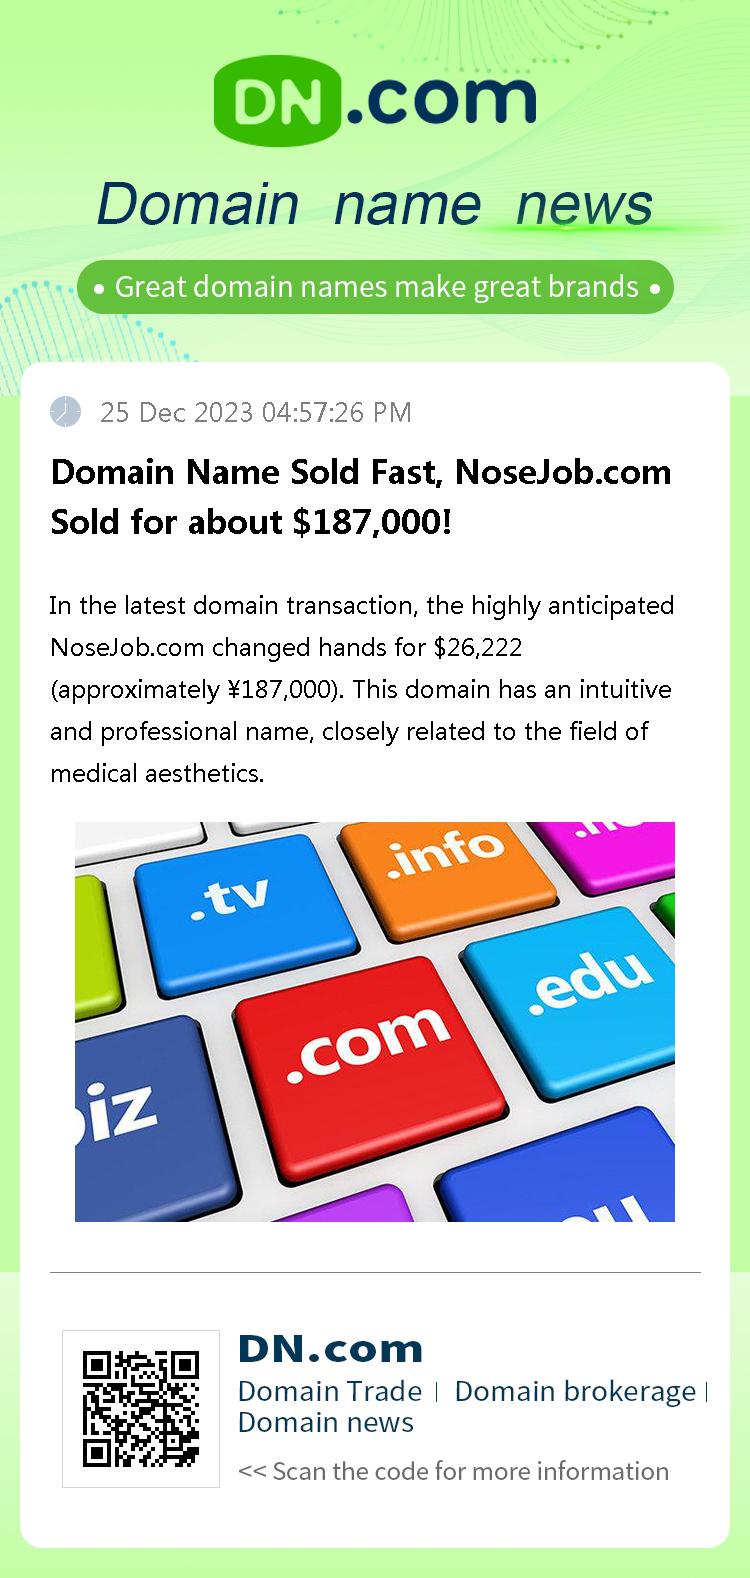 Domain Name Sold Fast, NoseJob.com Sold for about $187,000!